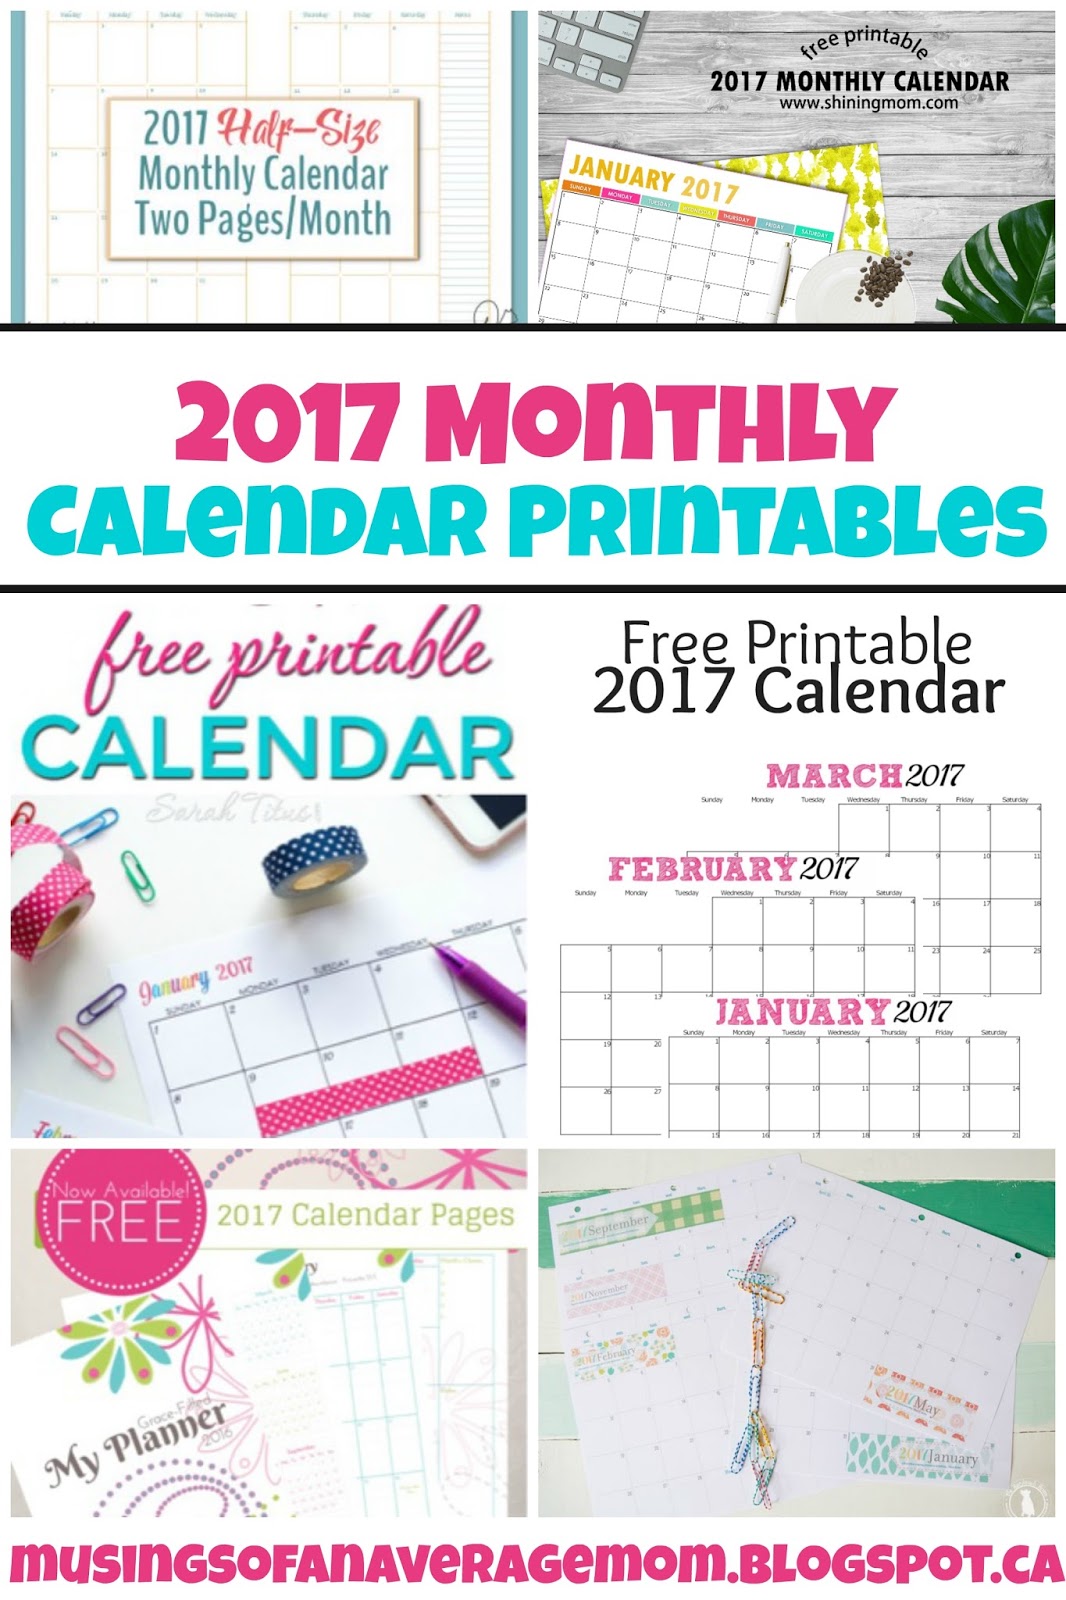 musings-of-an-average-mom-2017-monthly-calendars